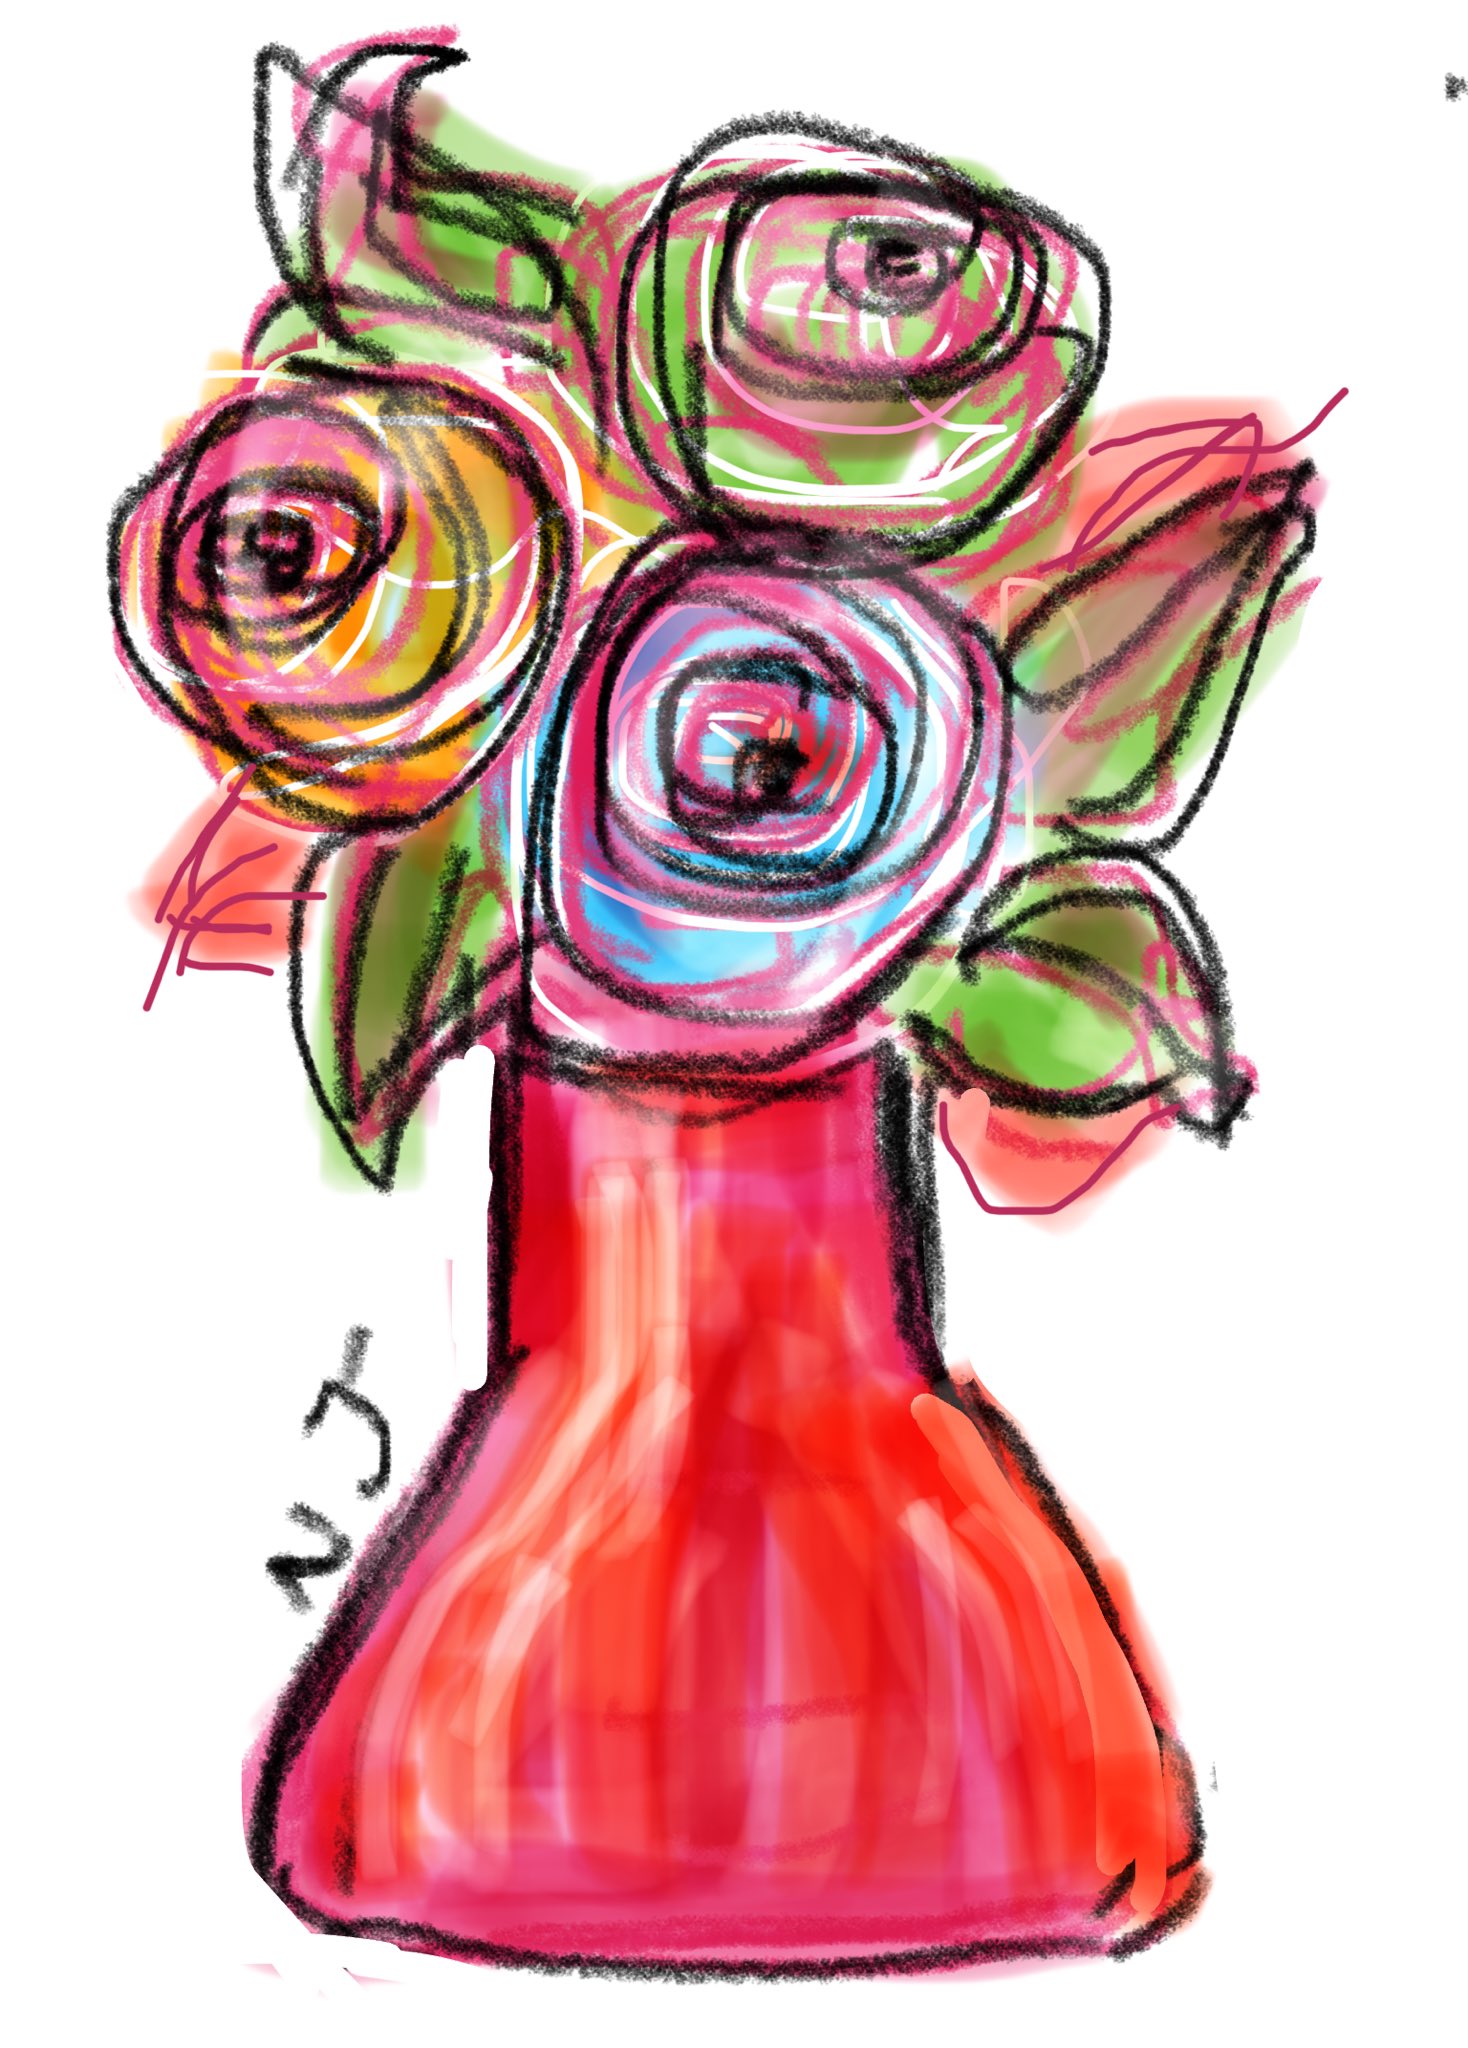 How to Draw Flowers in a Vase | Drawing for Kids and Coloring #flowers # drawing #vase #kids